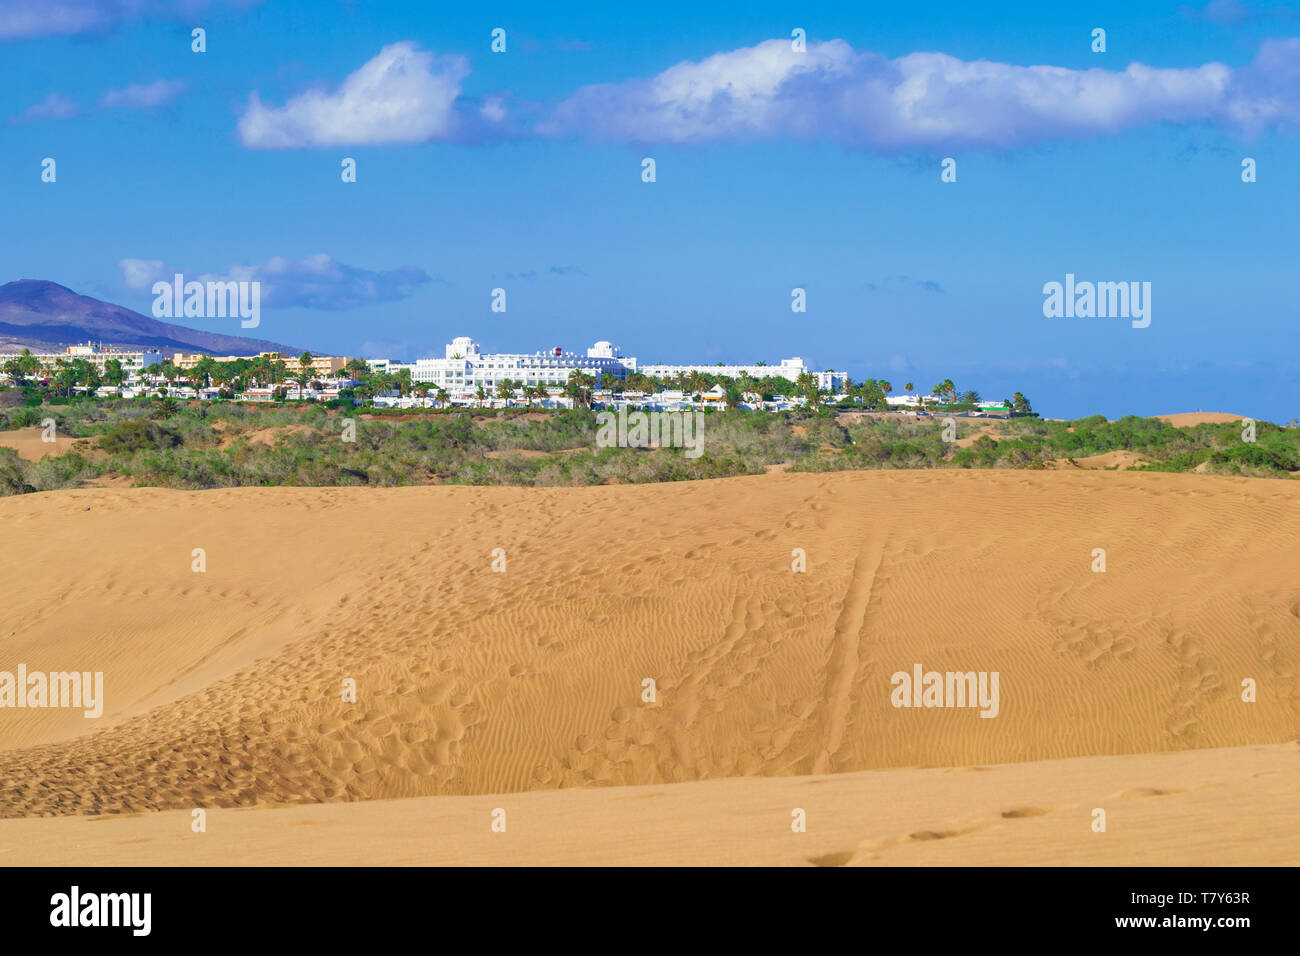 Landscape with wel known sand dunes from Maspalomas, Grand Canary, Canary Islands, Spain. Stock Photo